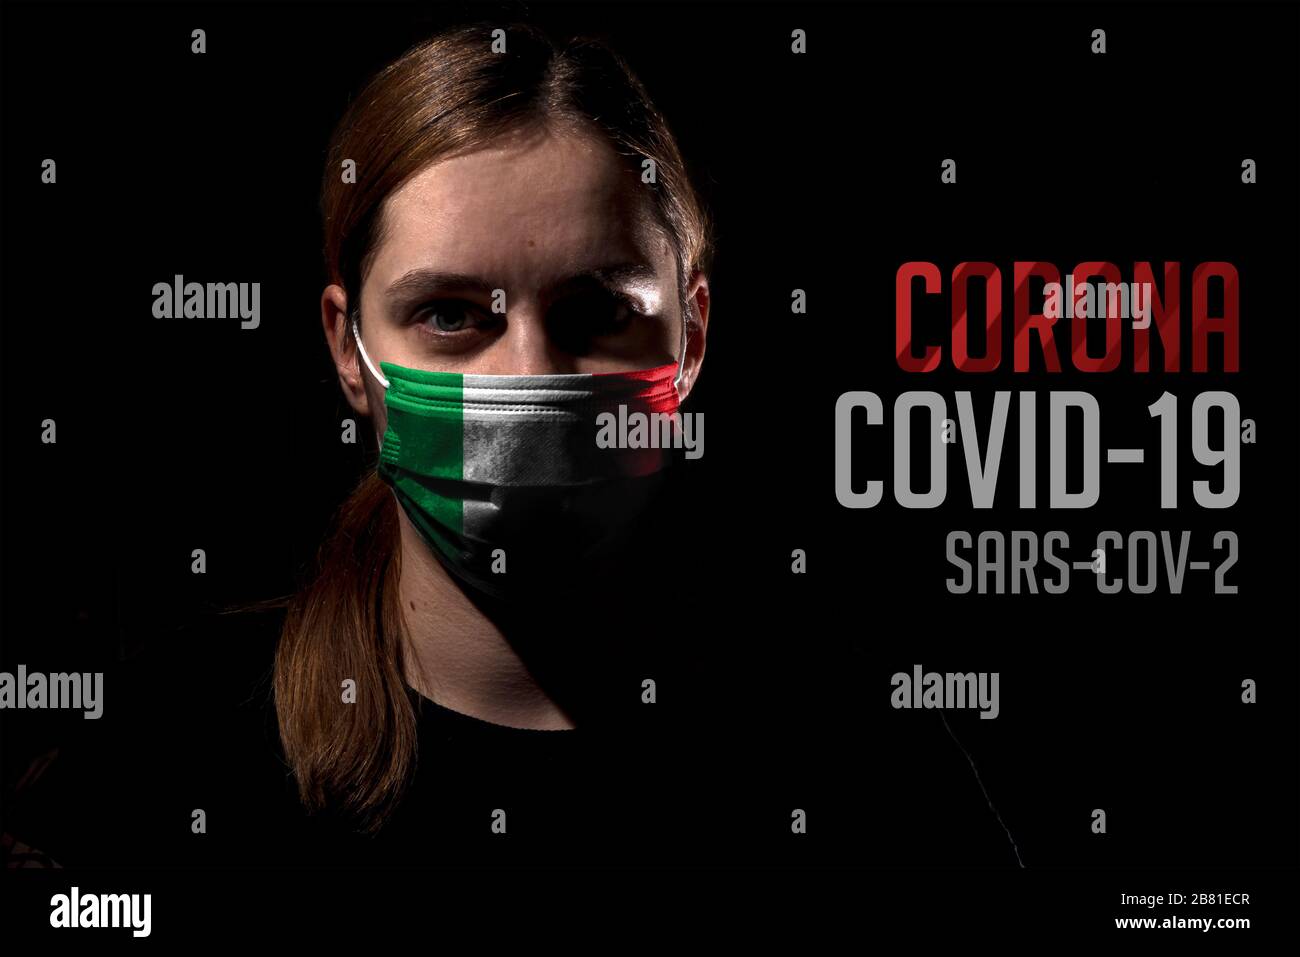 Woman wearing mask with Italy flag for protection of corona virus covid-19 SARS-CoV-2, woman with mask on black background Stock Photo